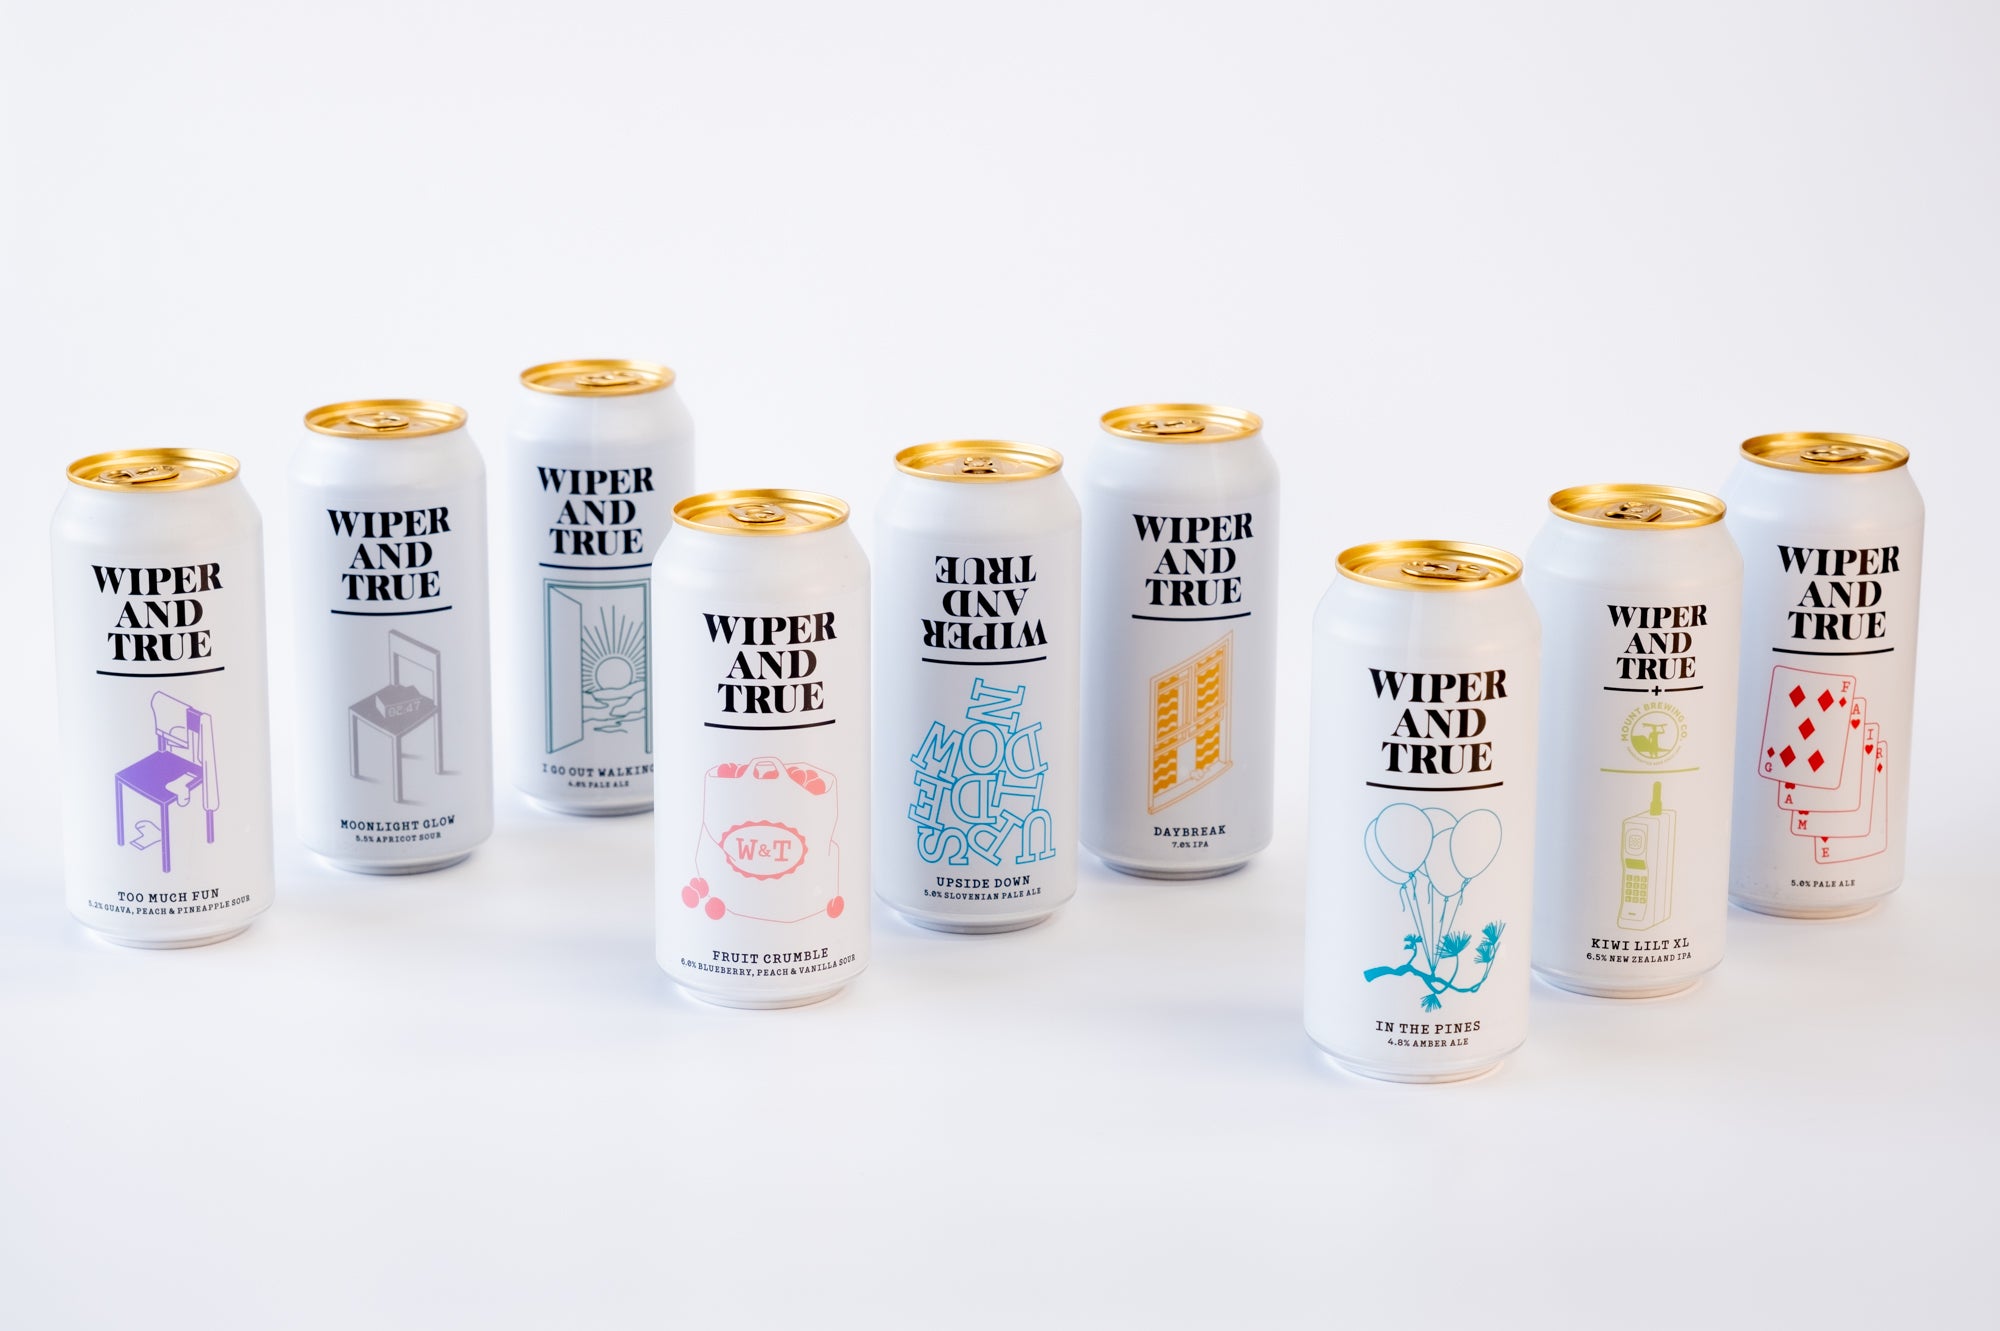 9 seasonal wiper and true cans on a white background